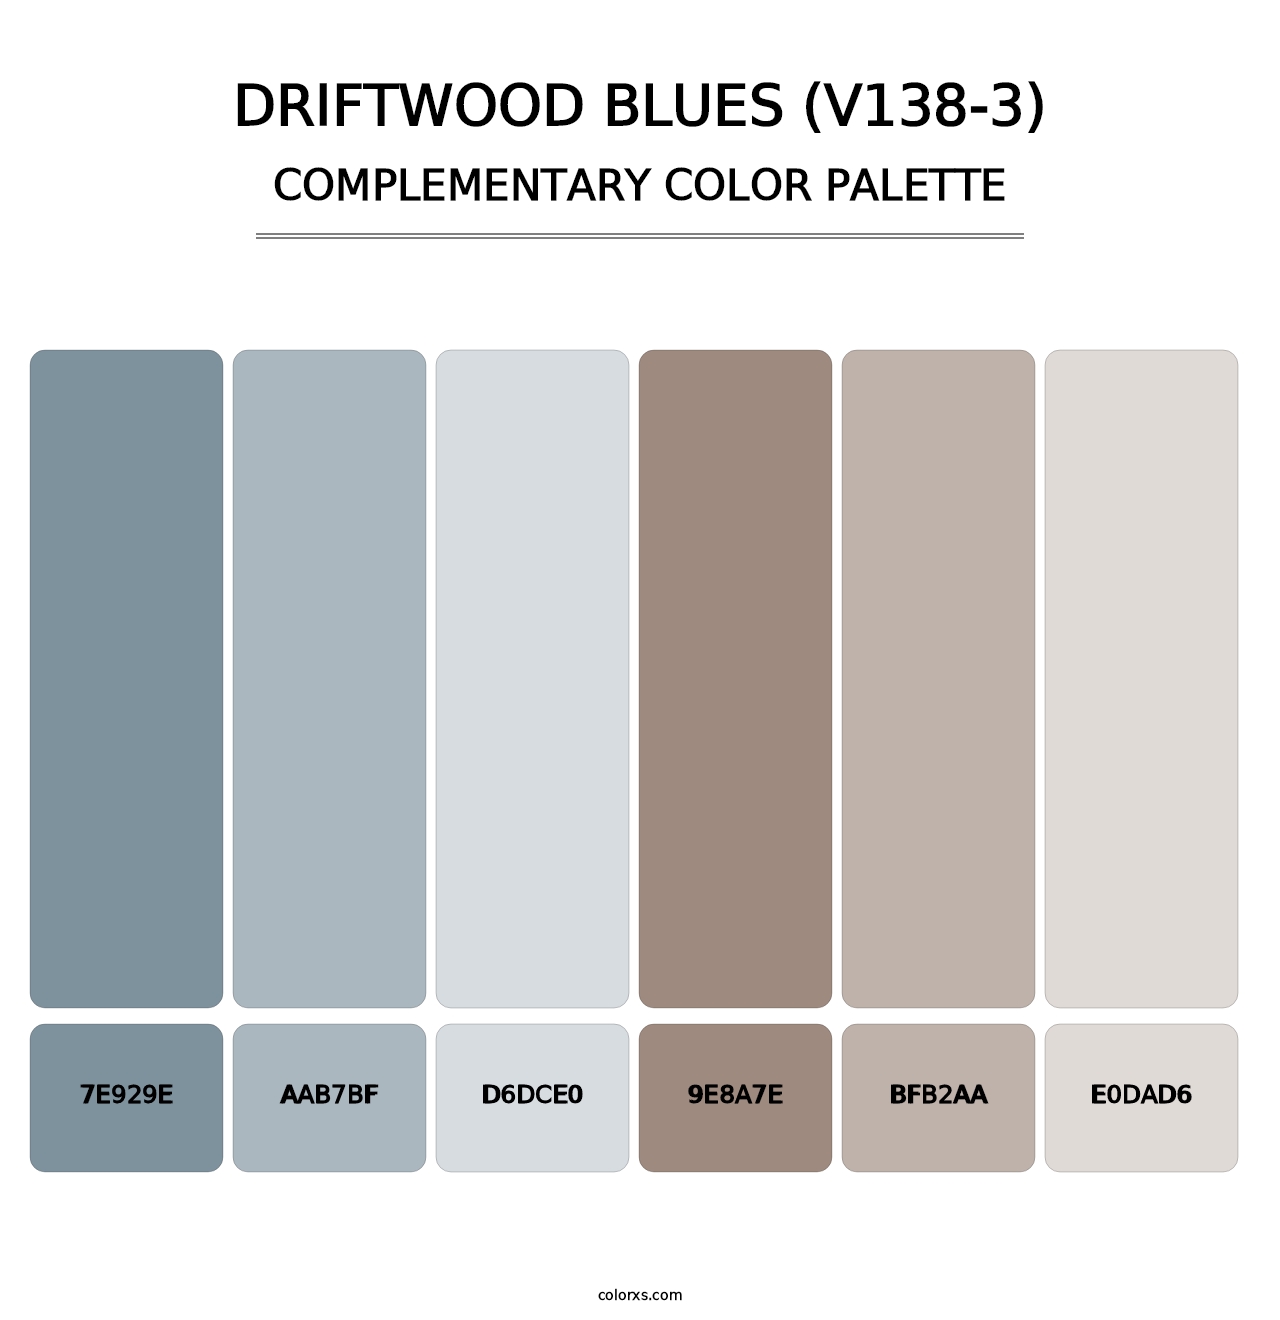 Driftwood Blues (V138-3) - Complementary Color Palette